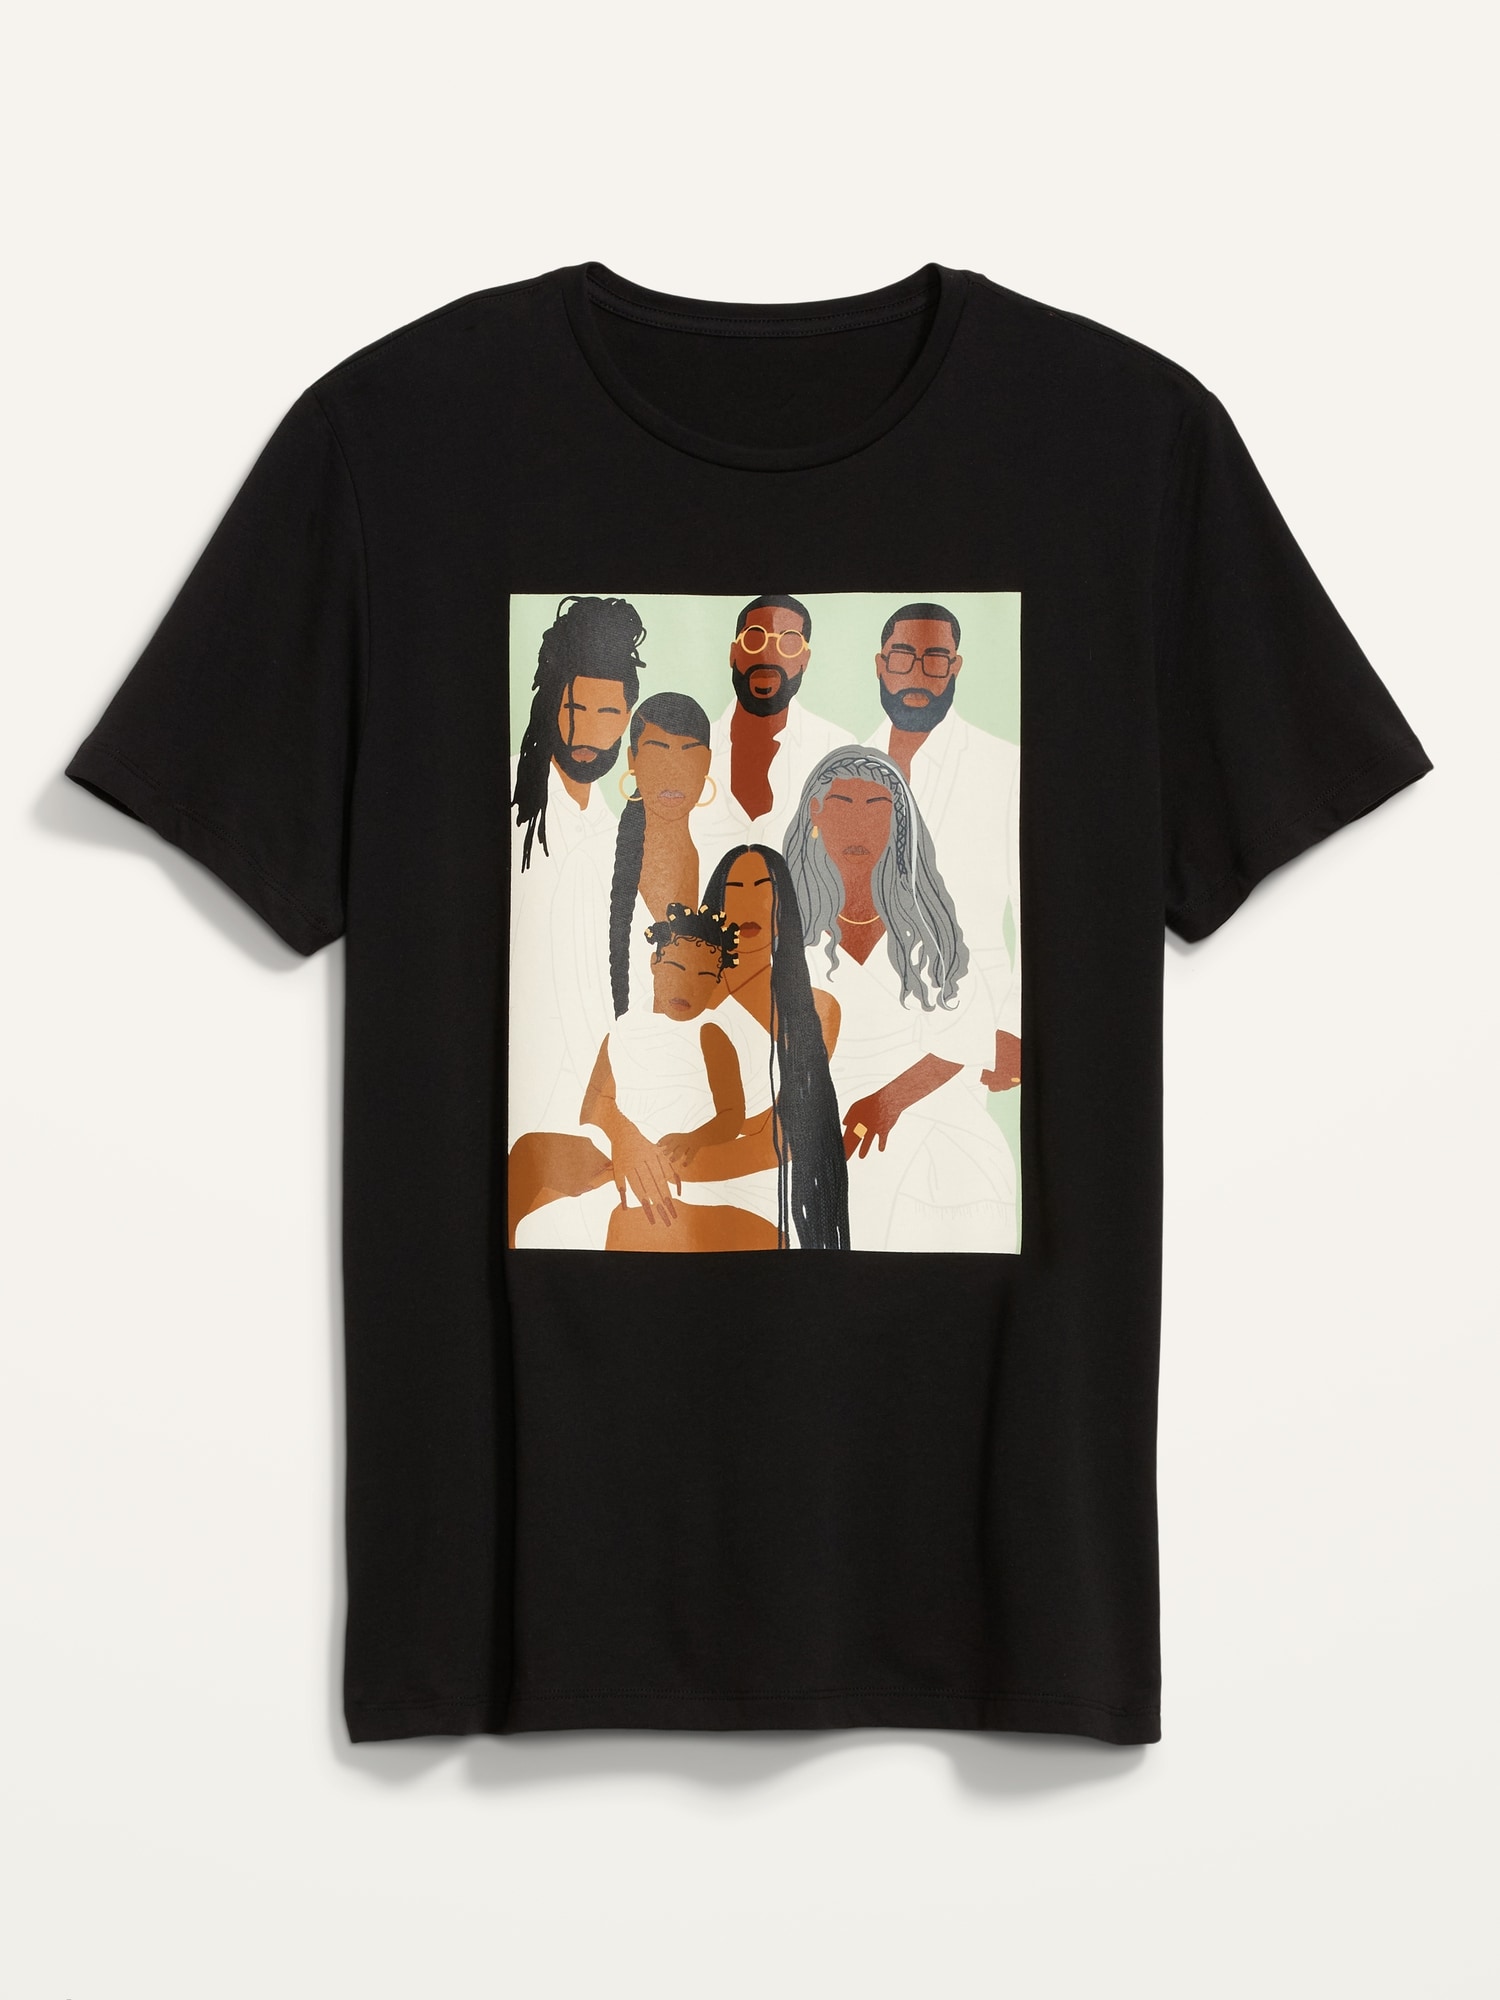 EXTRAORDINARY BLACK WOMEN Black History Shirt Black Queens Black Pride Black  Owned Clothing Gifts for Her African America Women in History -  Canada